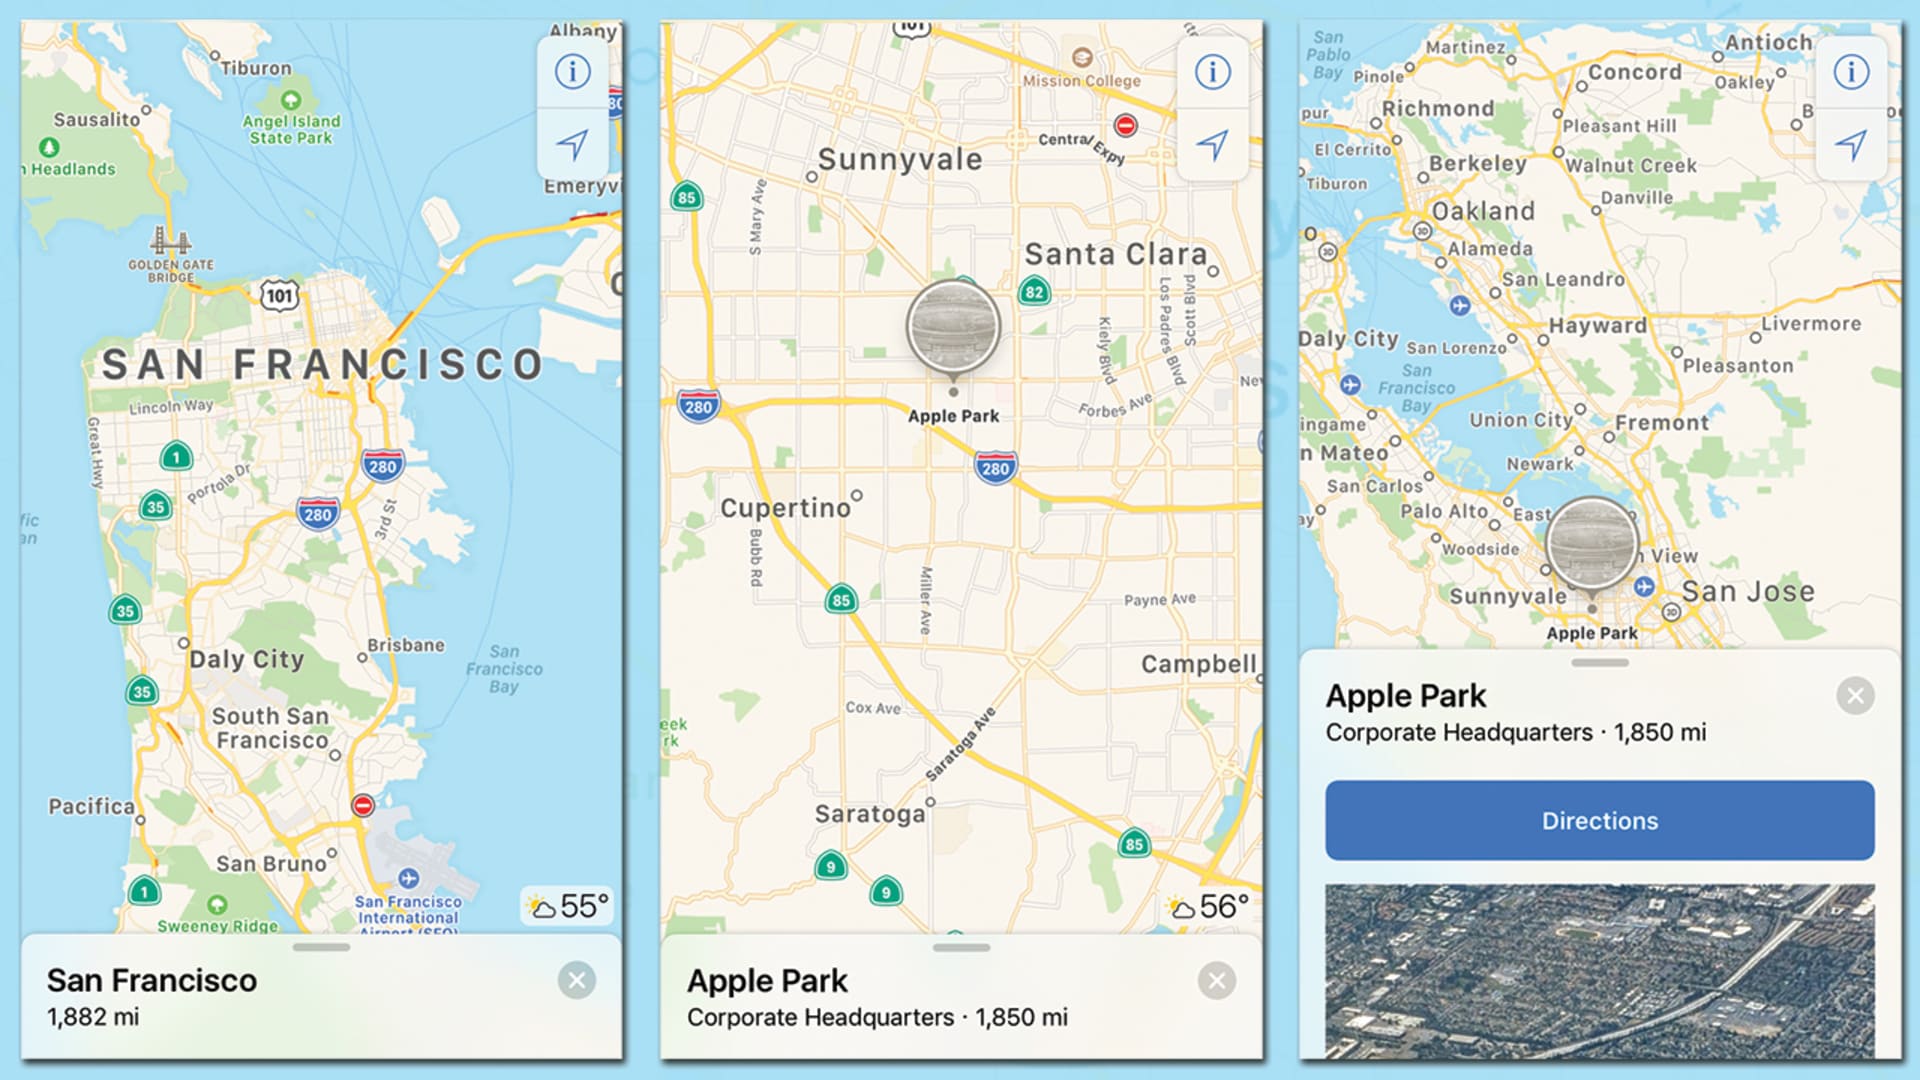 This one strategic decision consigned Apple Maps to mediocrity